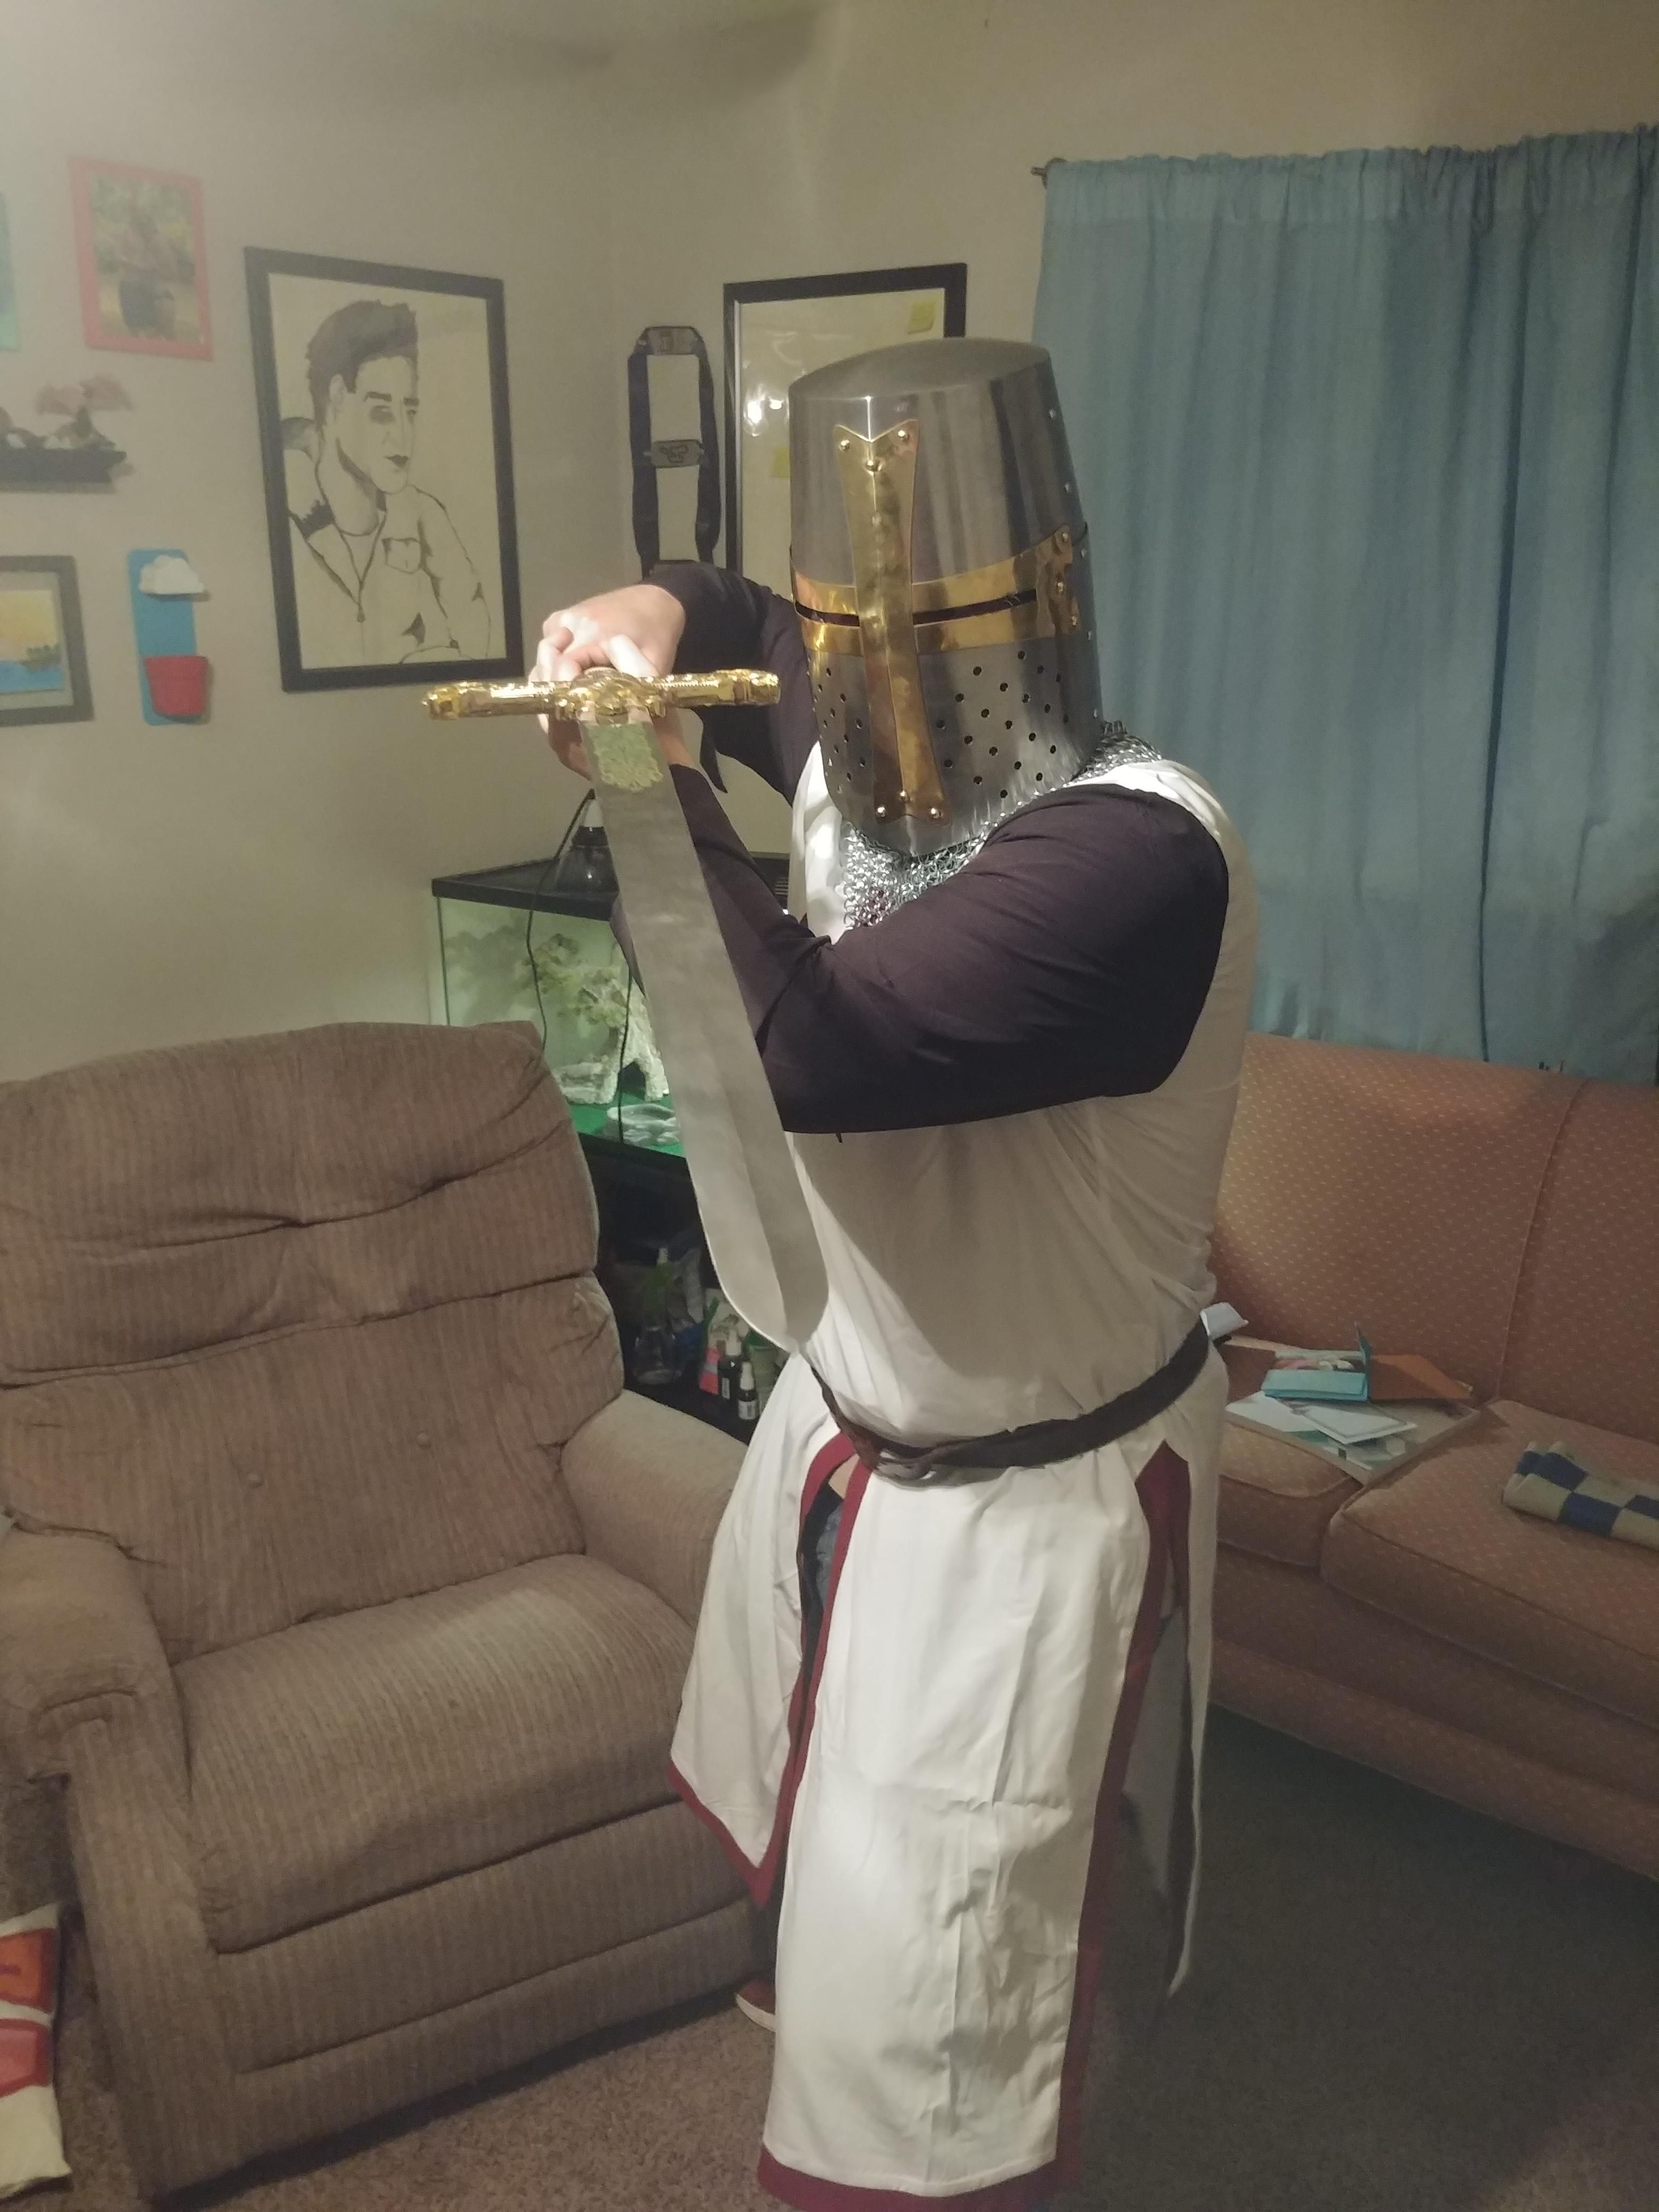 My friend has been saying that we need to go on a crusade. This is how he showed up at my apartment tonight.